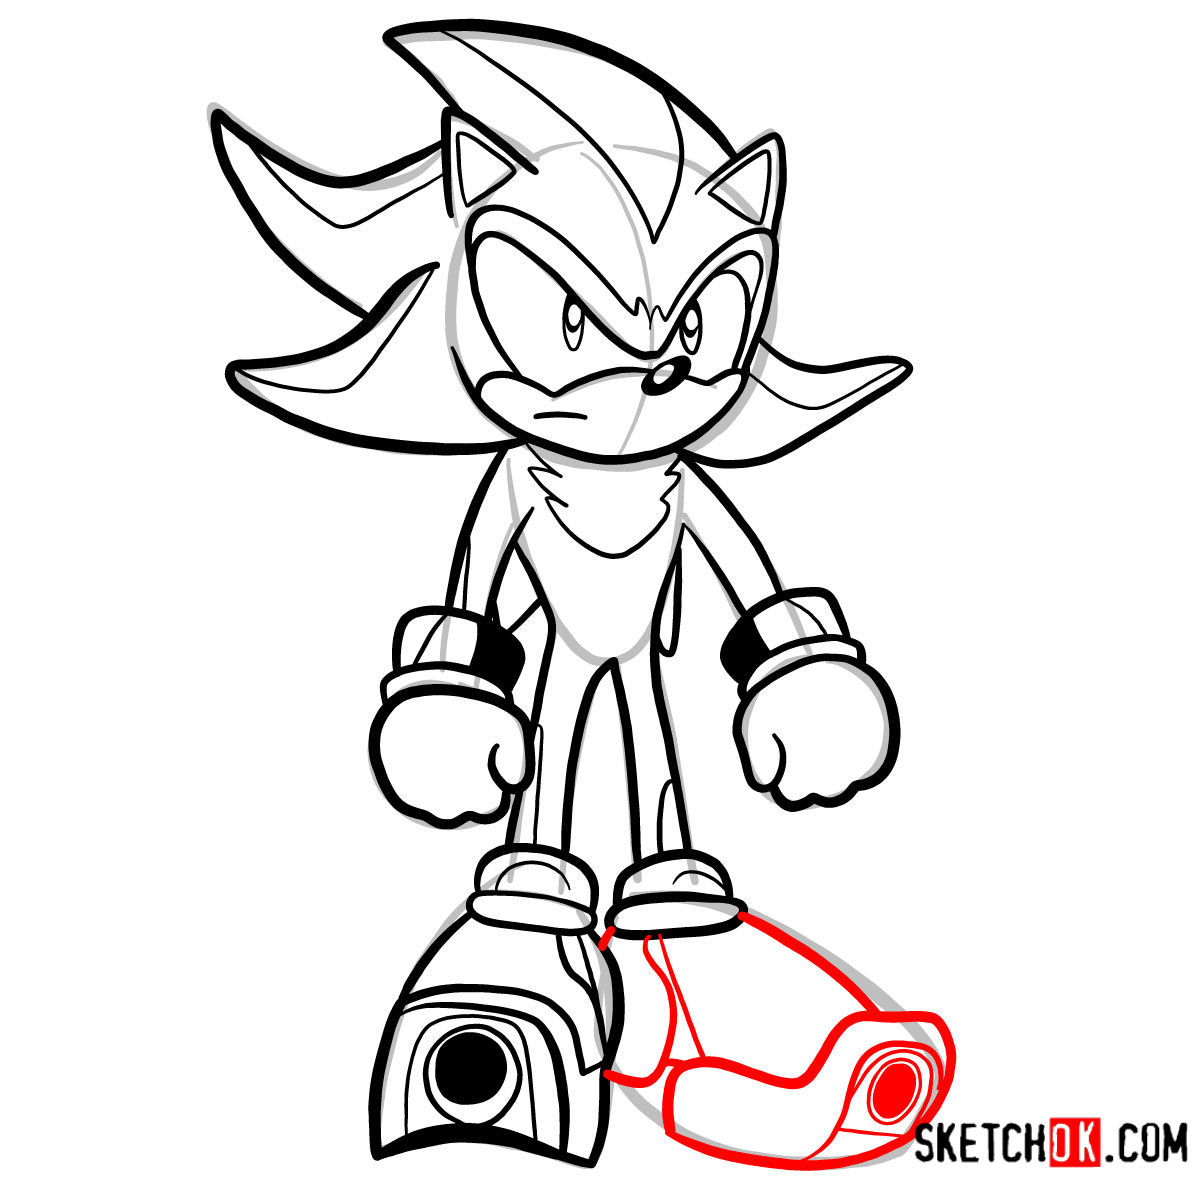 How to draw Shadow the Hedgehog - step 11